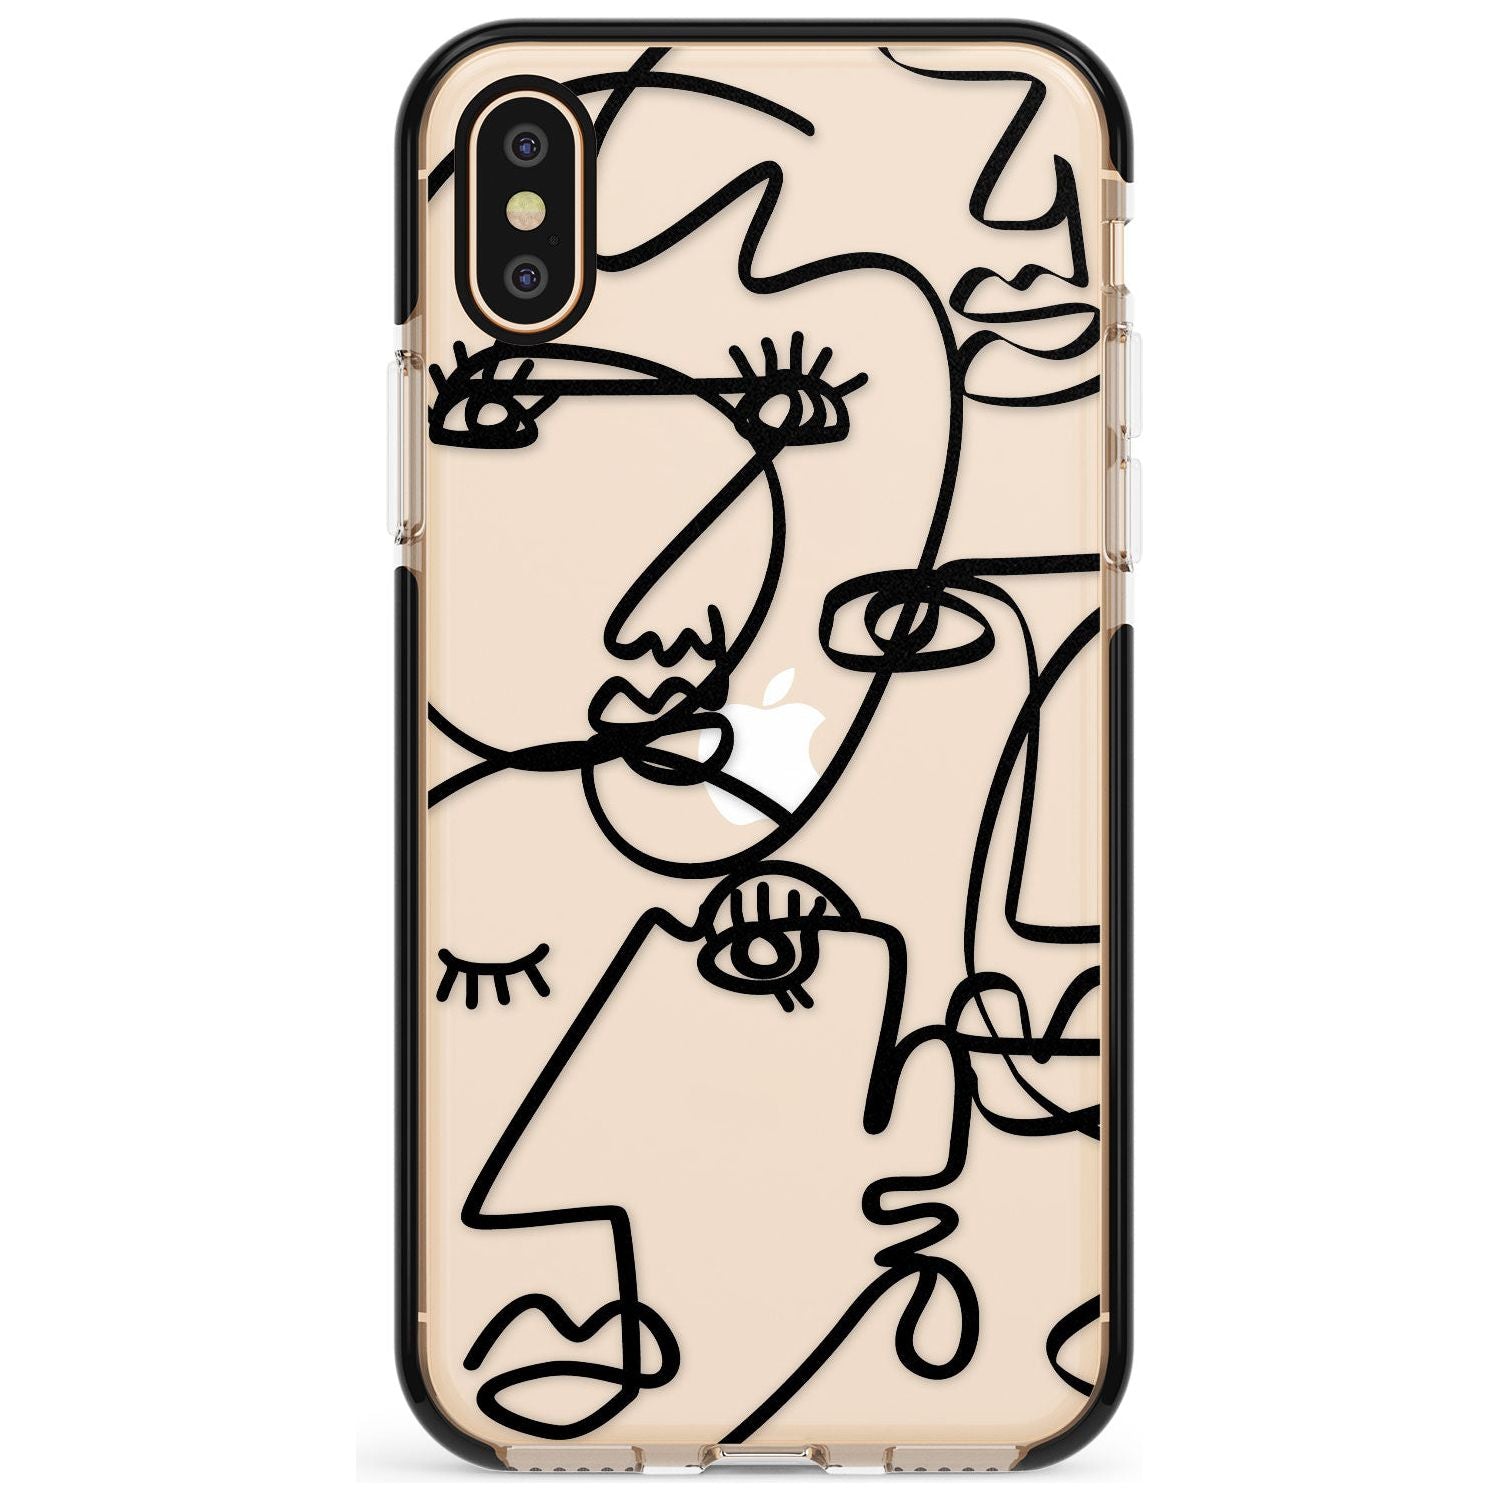 Continuous Line Faces: Black on Clear Pink Fade Impact Phone Case for iPhone X XS Max XR